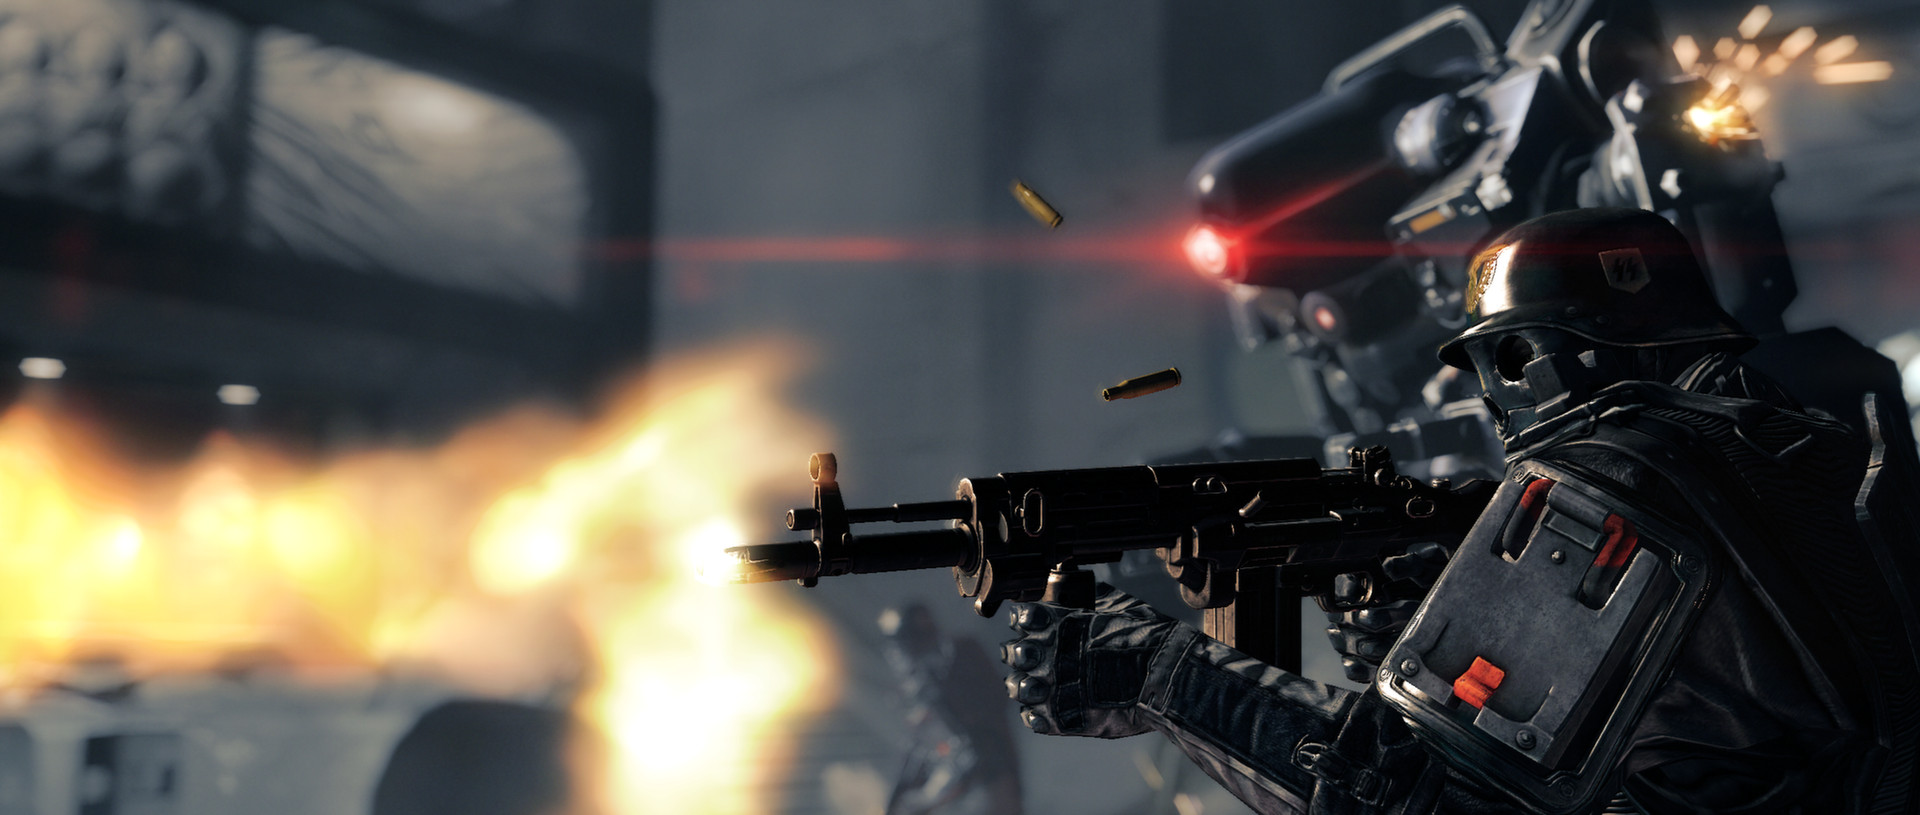 Bethesda Reveal Beefy System Requirements For Wolfenstein: The New